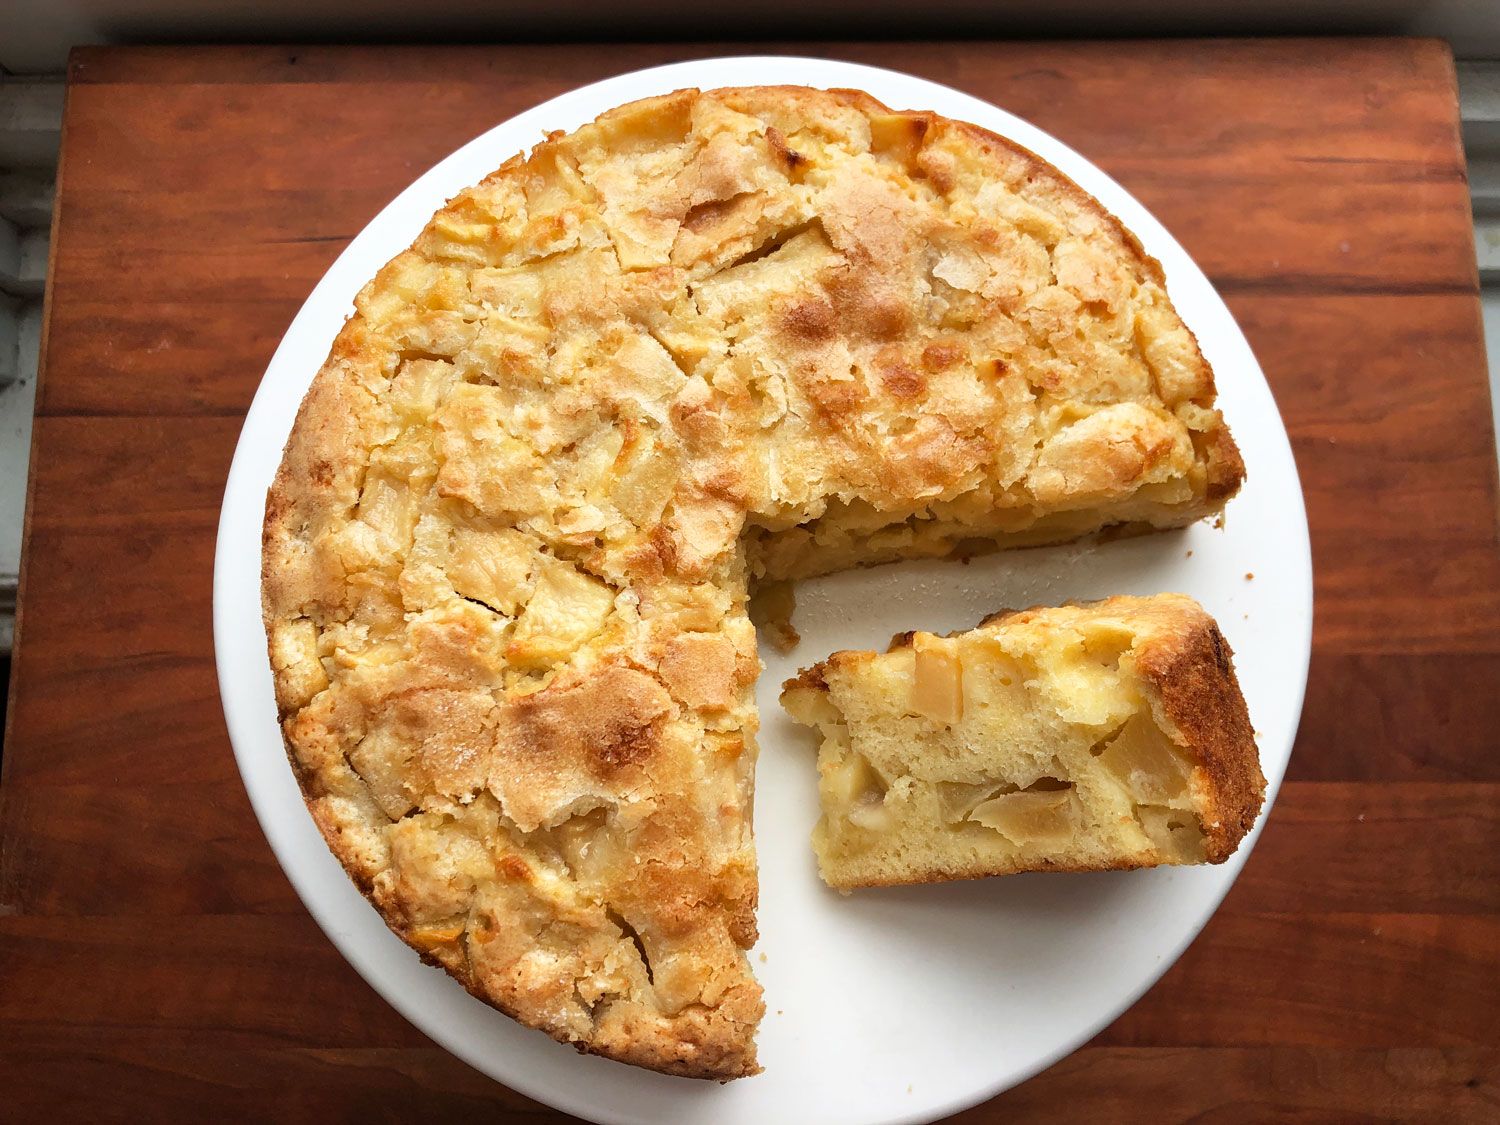 Best French Apple Cake Recipe - How to Make French Apple Cake